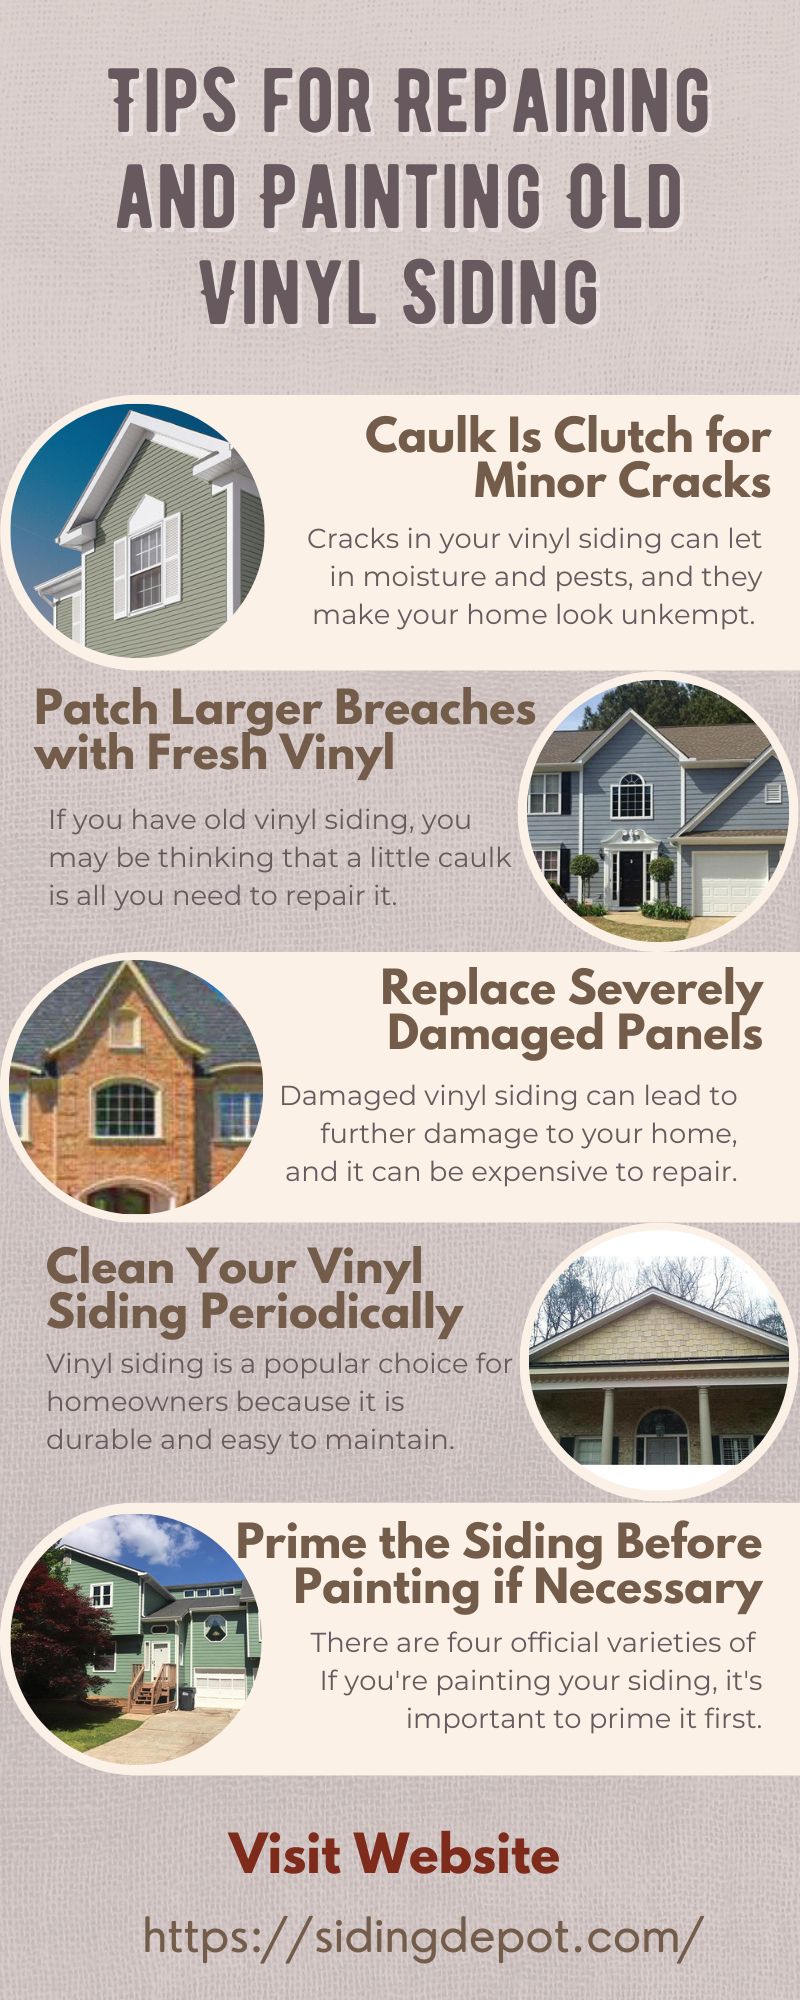 Tips for Repairing and Painting Old Vinyl Siding